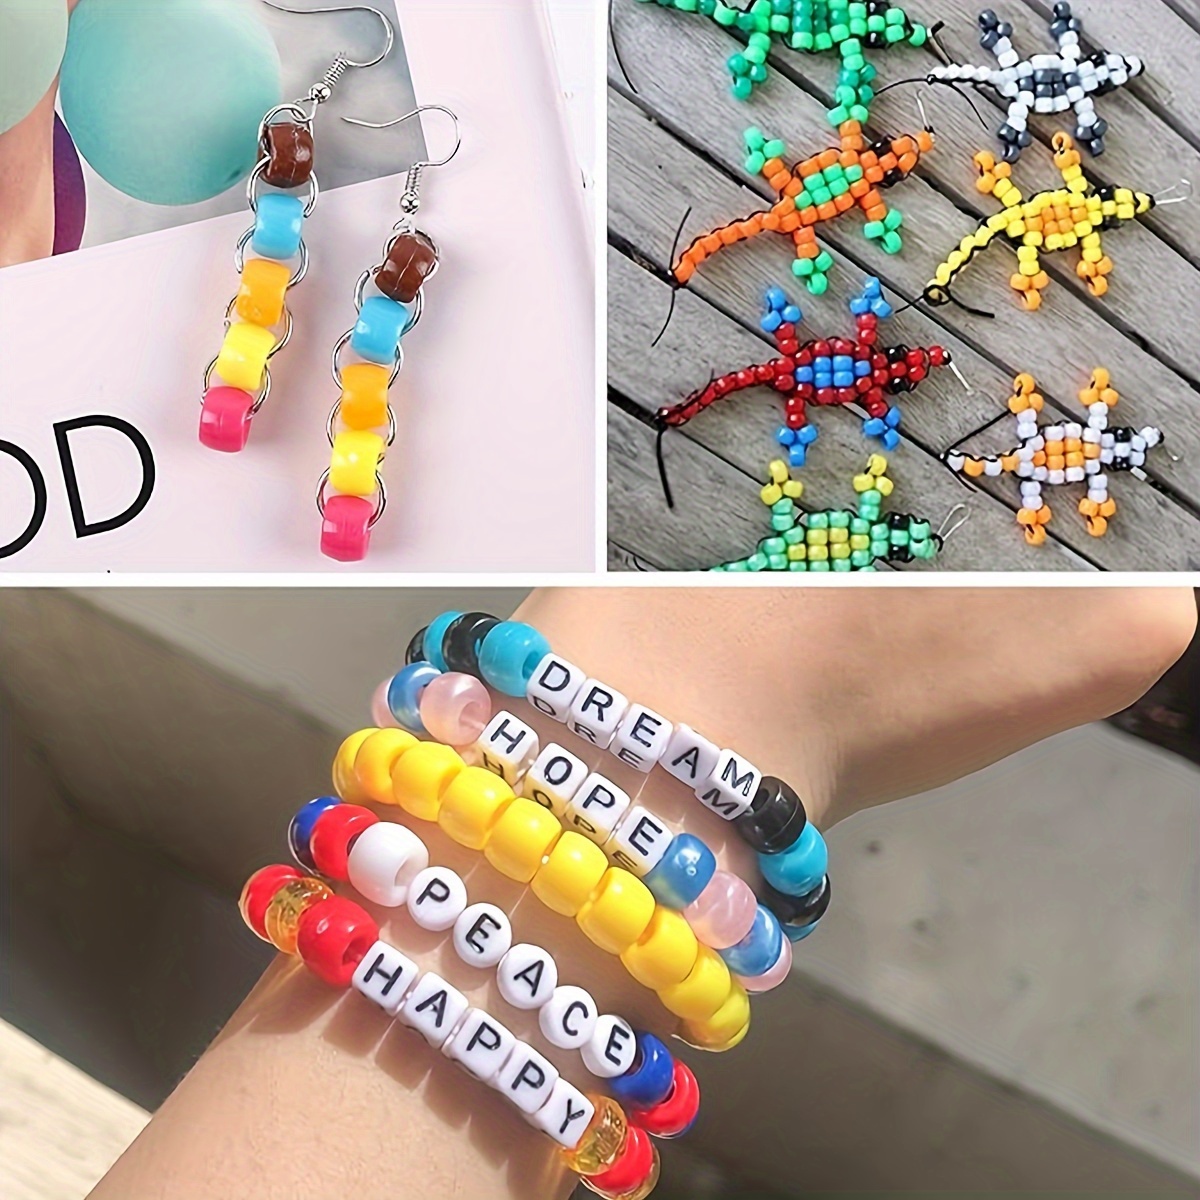 Friendship Bracelets Making Kit ,Kandi Bracelet Kit with Pony Beads Elastic  String Charm Smiley Face and Letter Beads for Kids Crafts and Jewelry